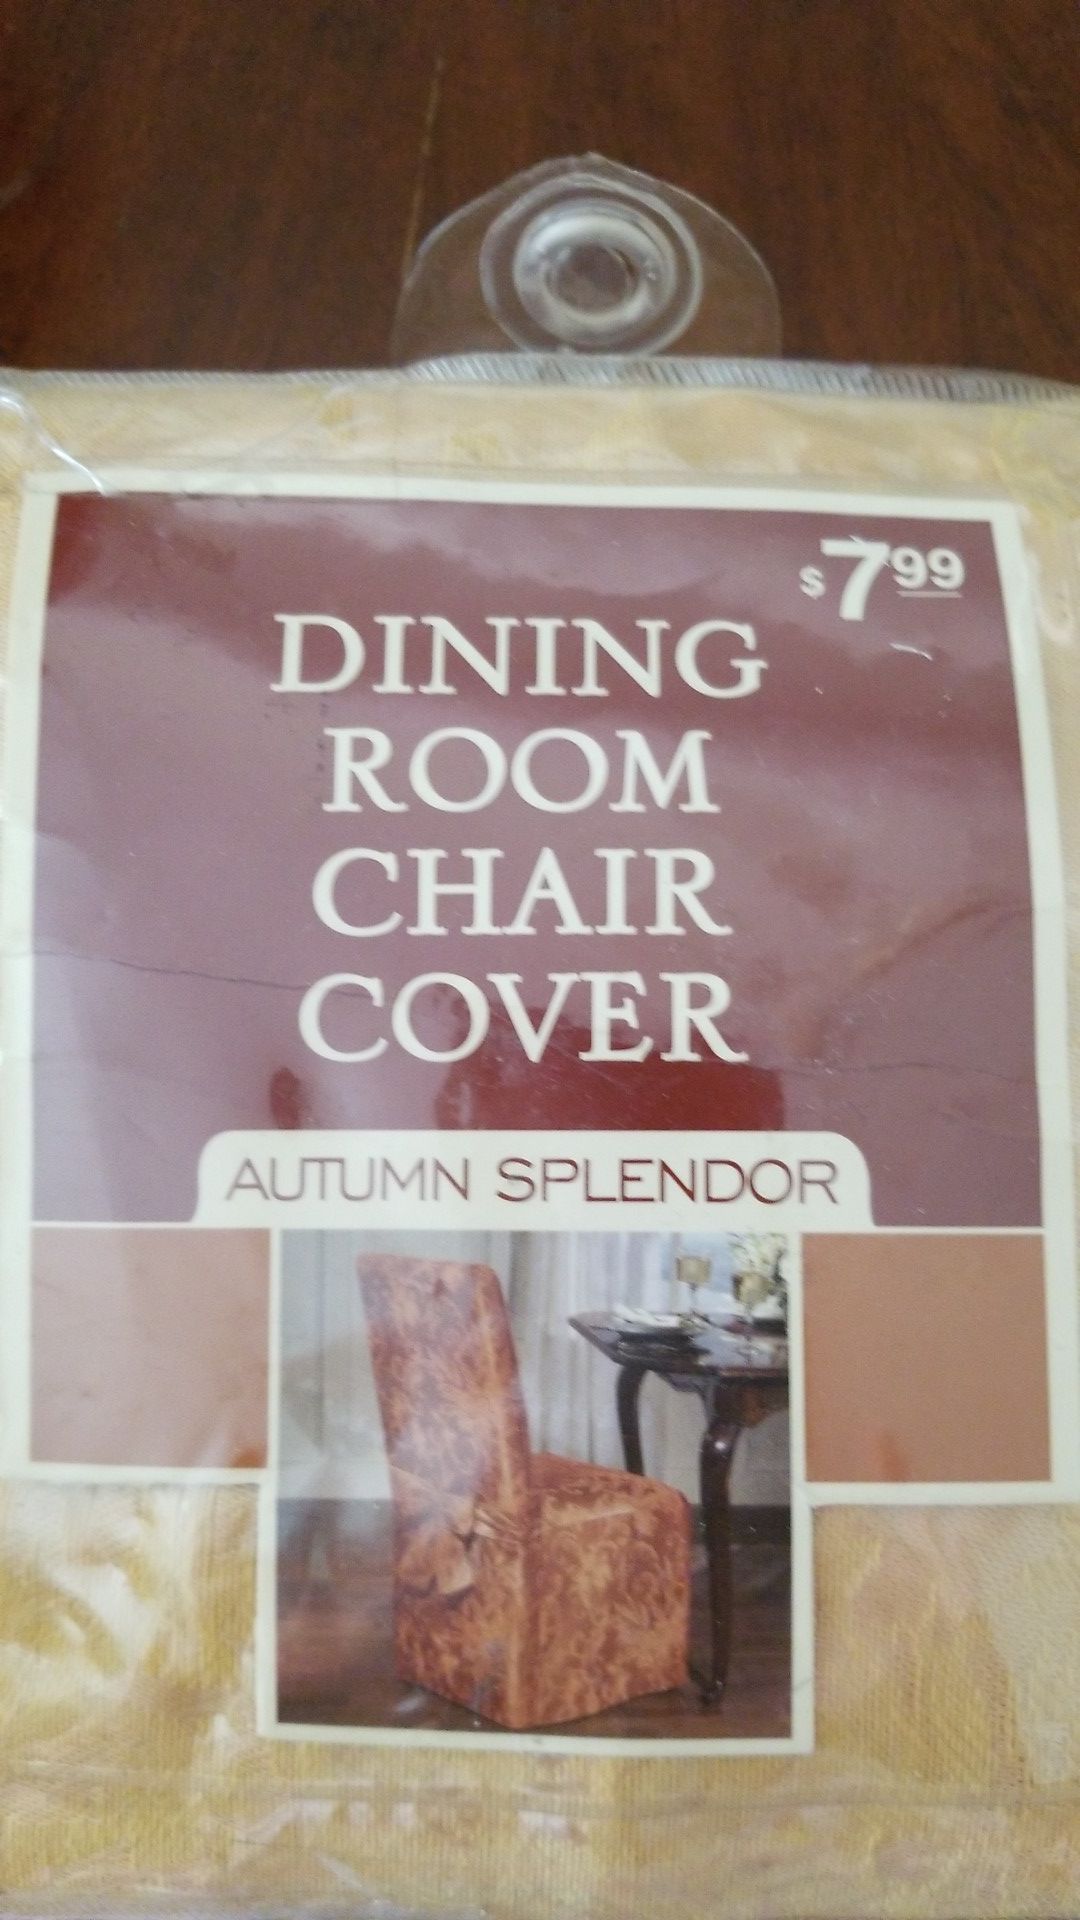 Dining Room chair covers brand new package, I have 2 for $8.00 complete